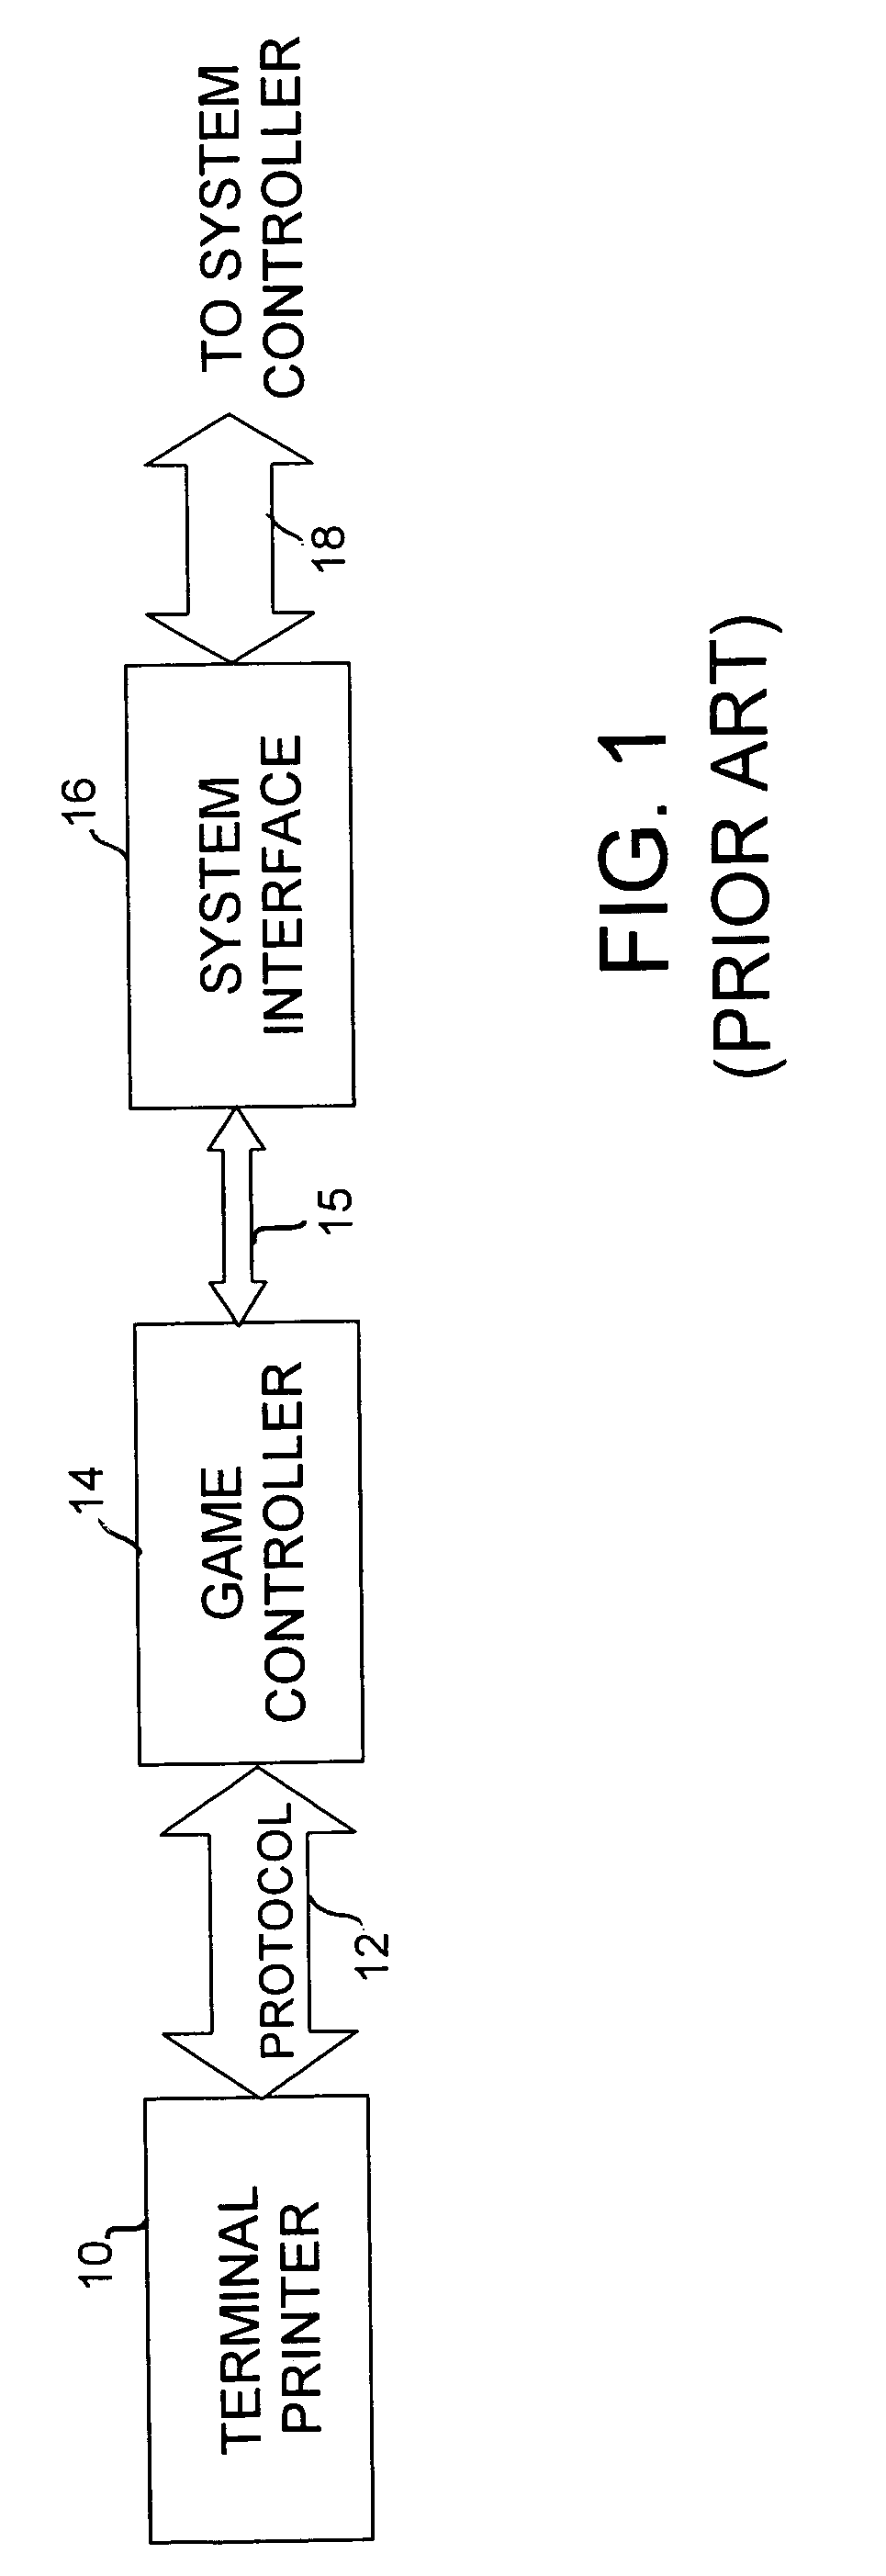 Method and apparatus for controlling a peripheral via different data ports